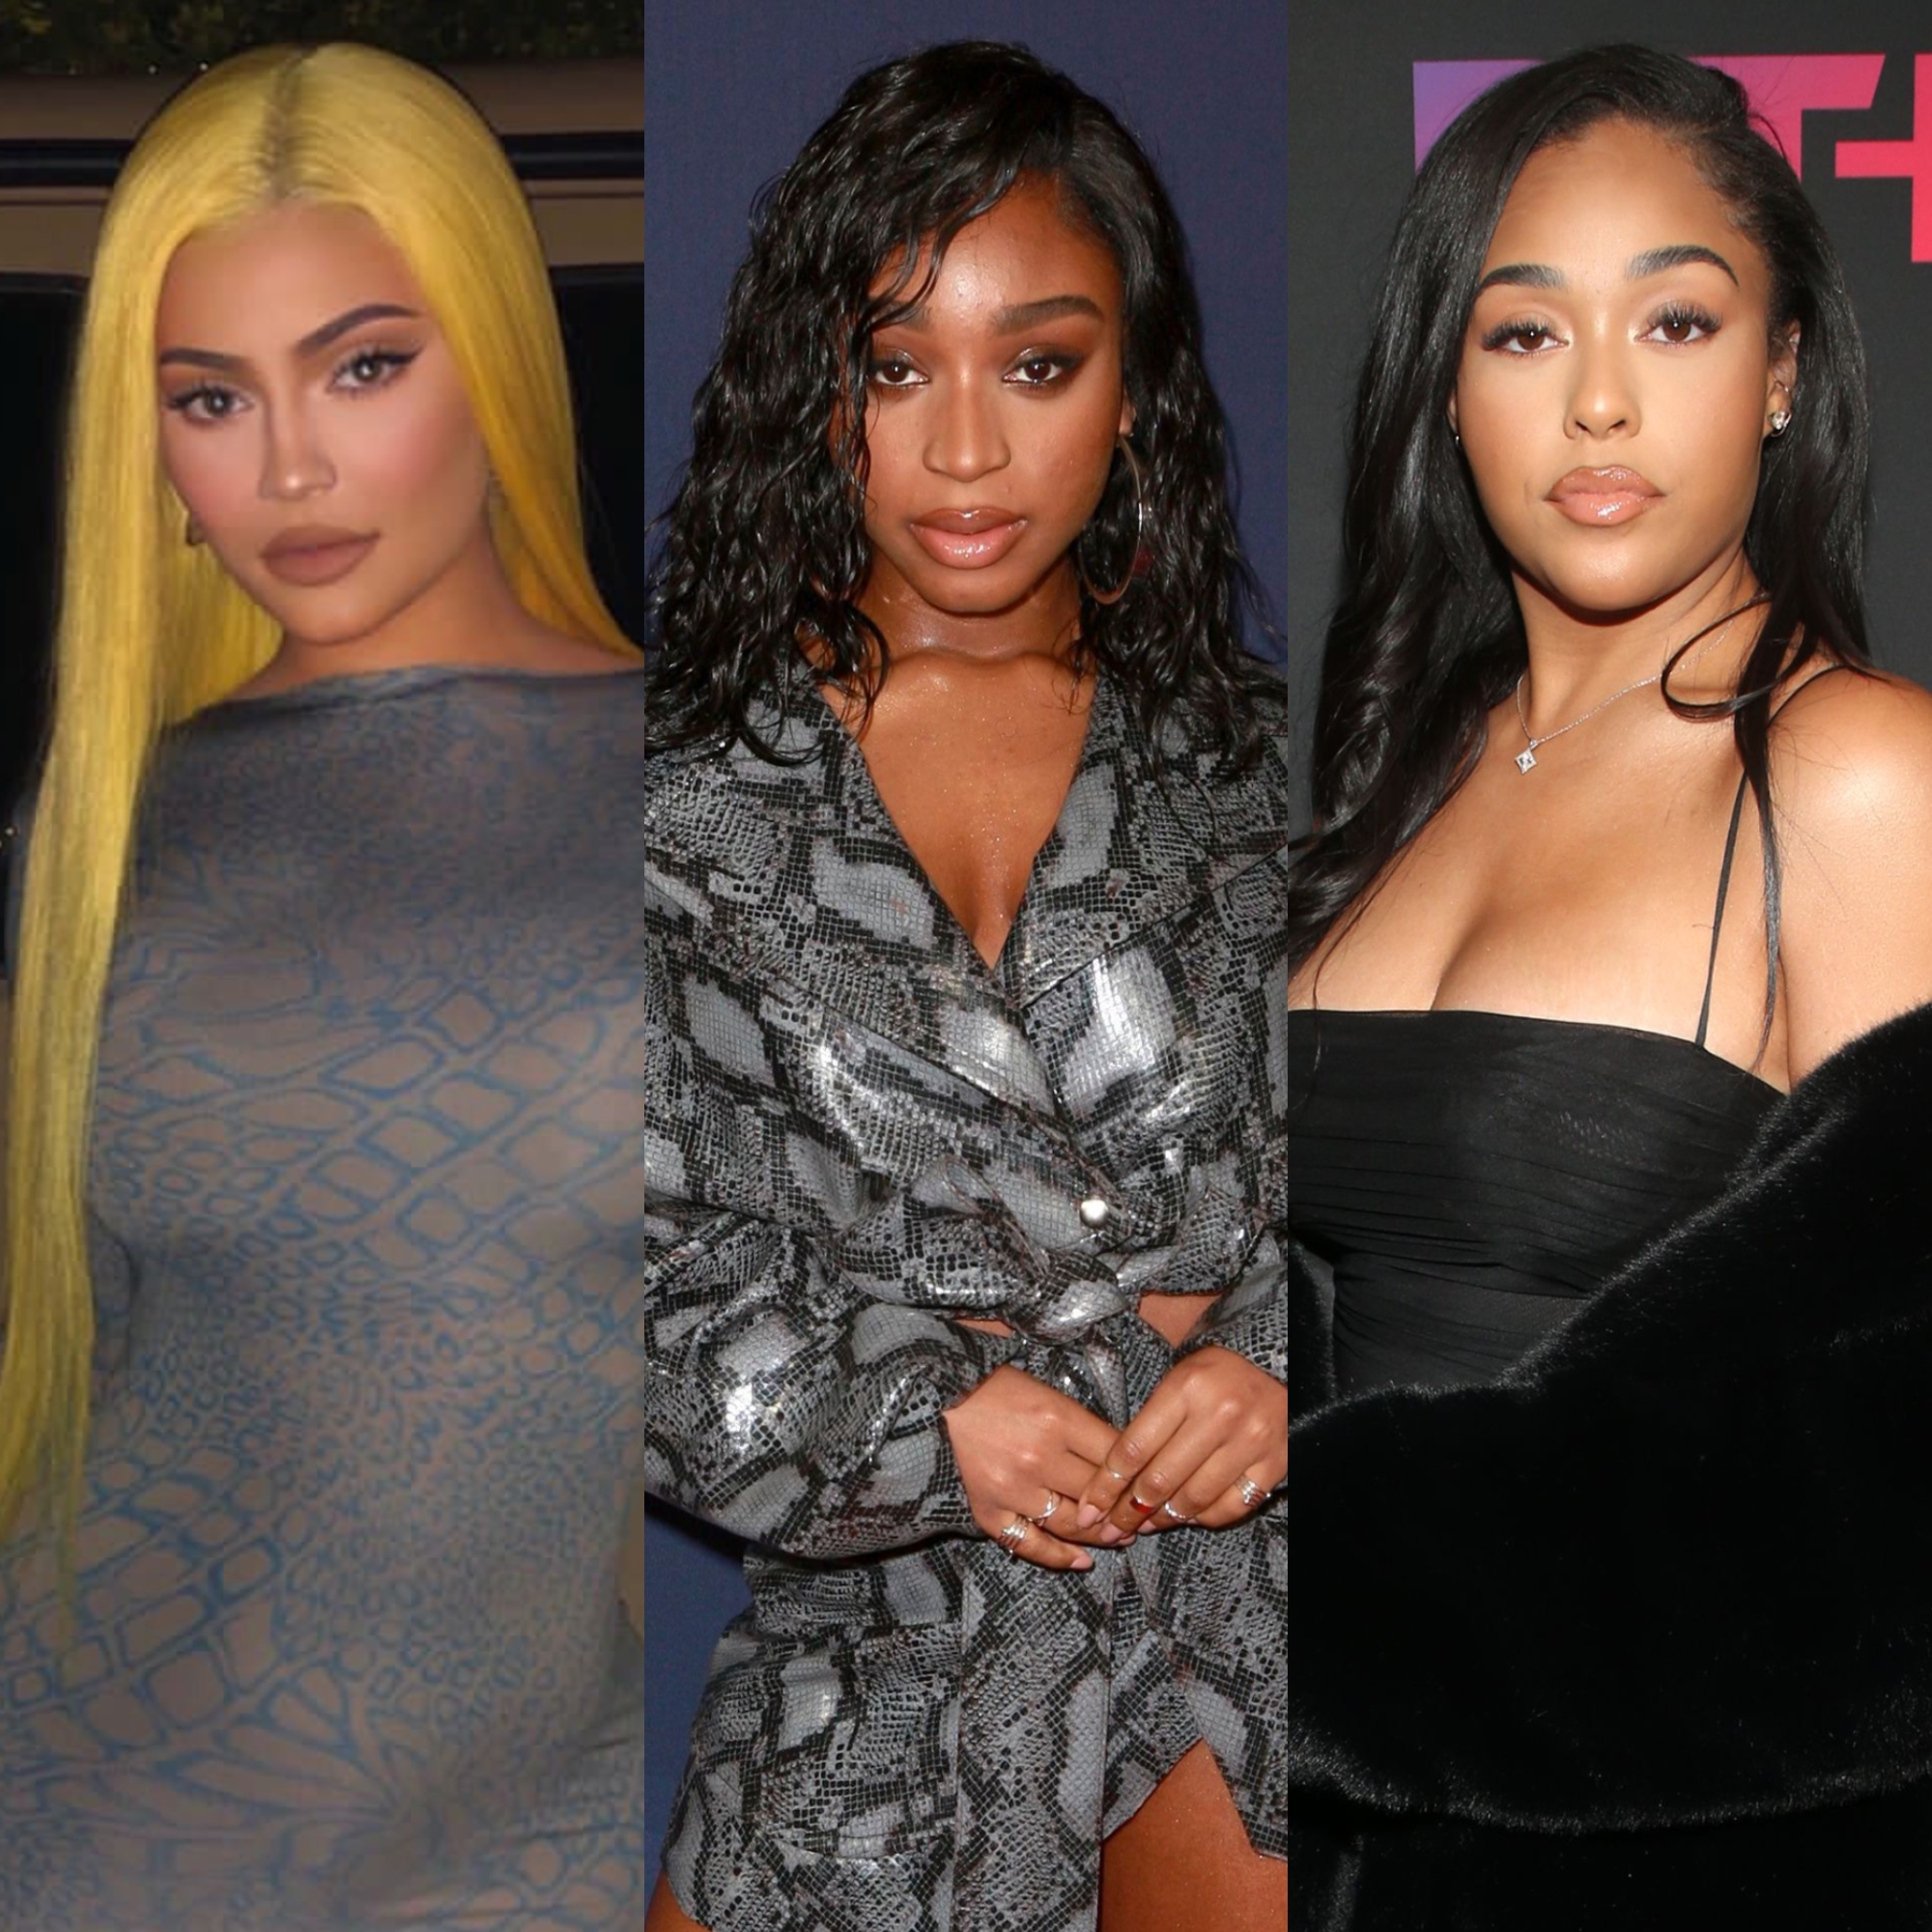 Kylie Comments on Ex-BFF Jordyn Friend Normani's